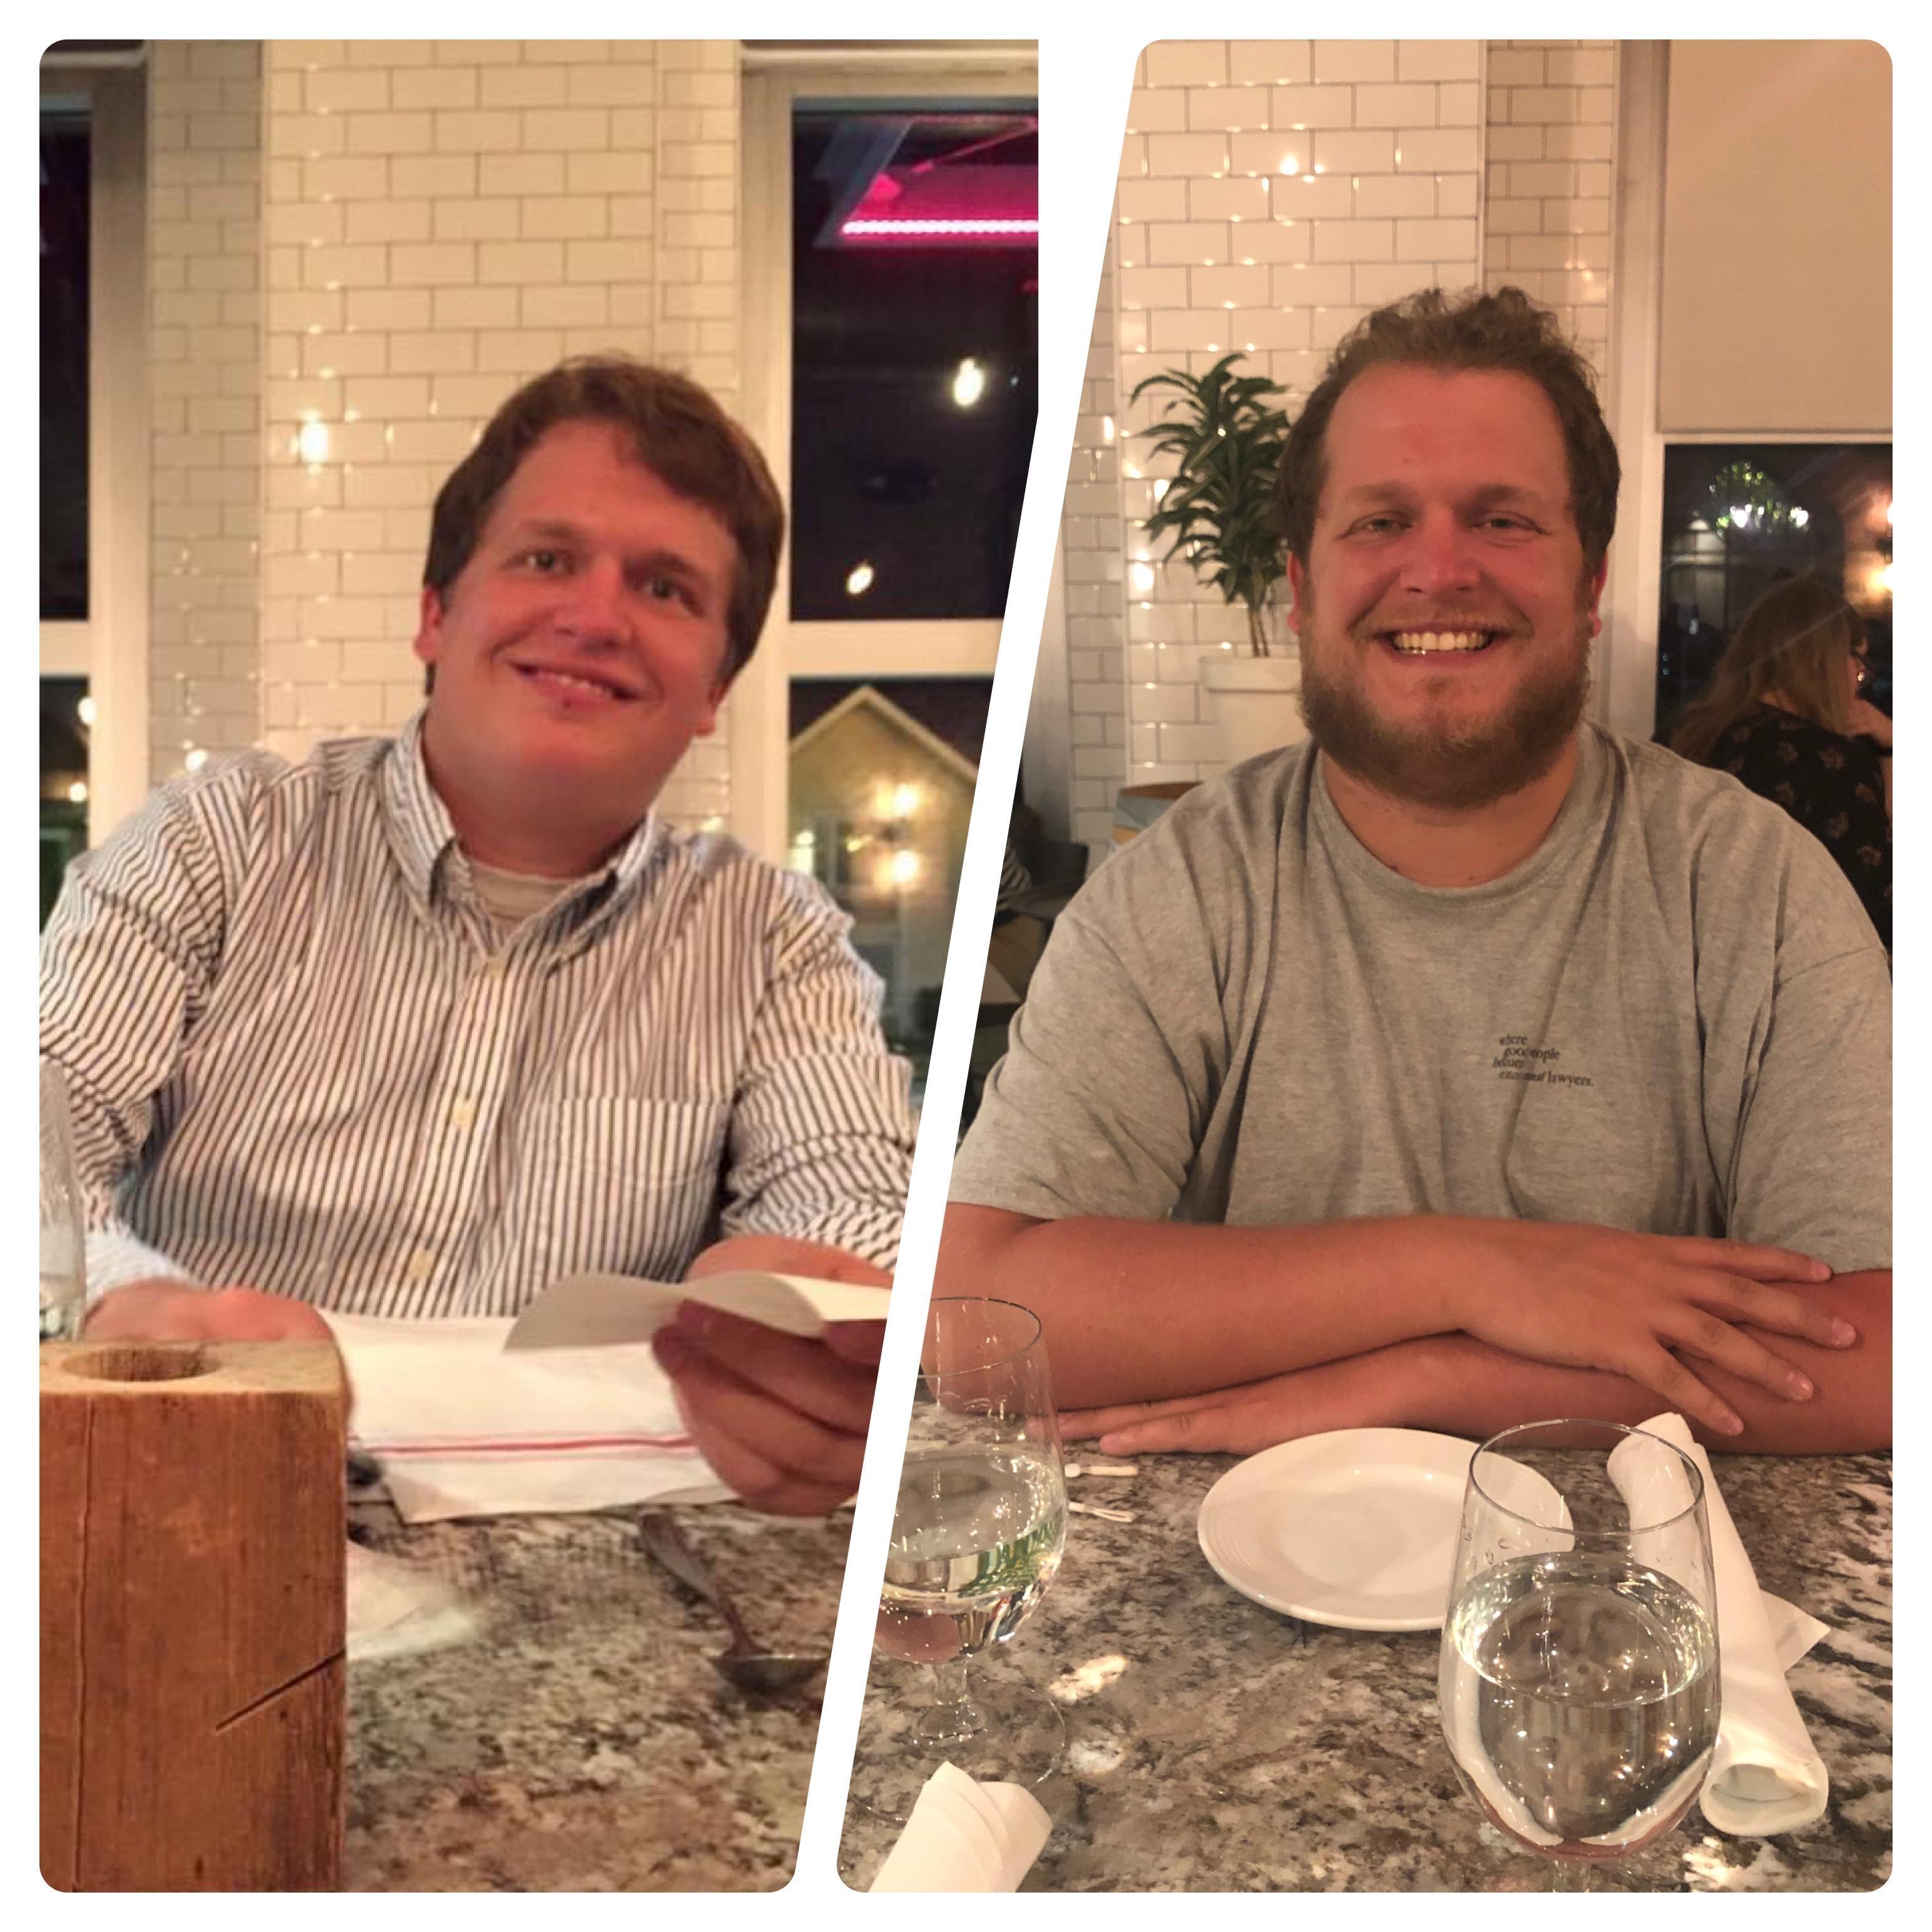 First Date location 6 years apart (October 2021)